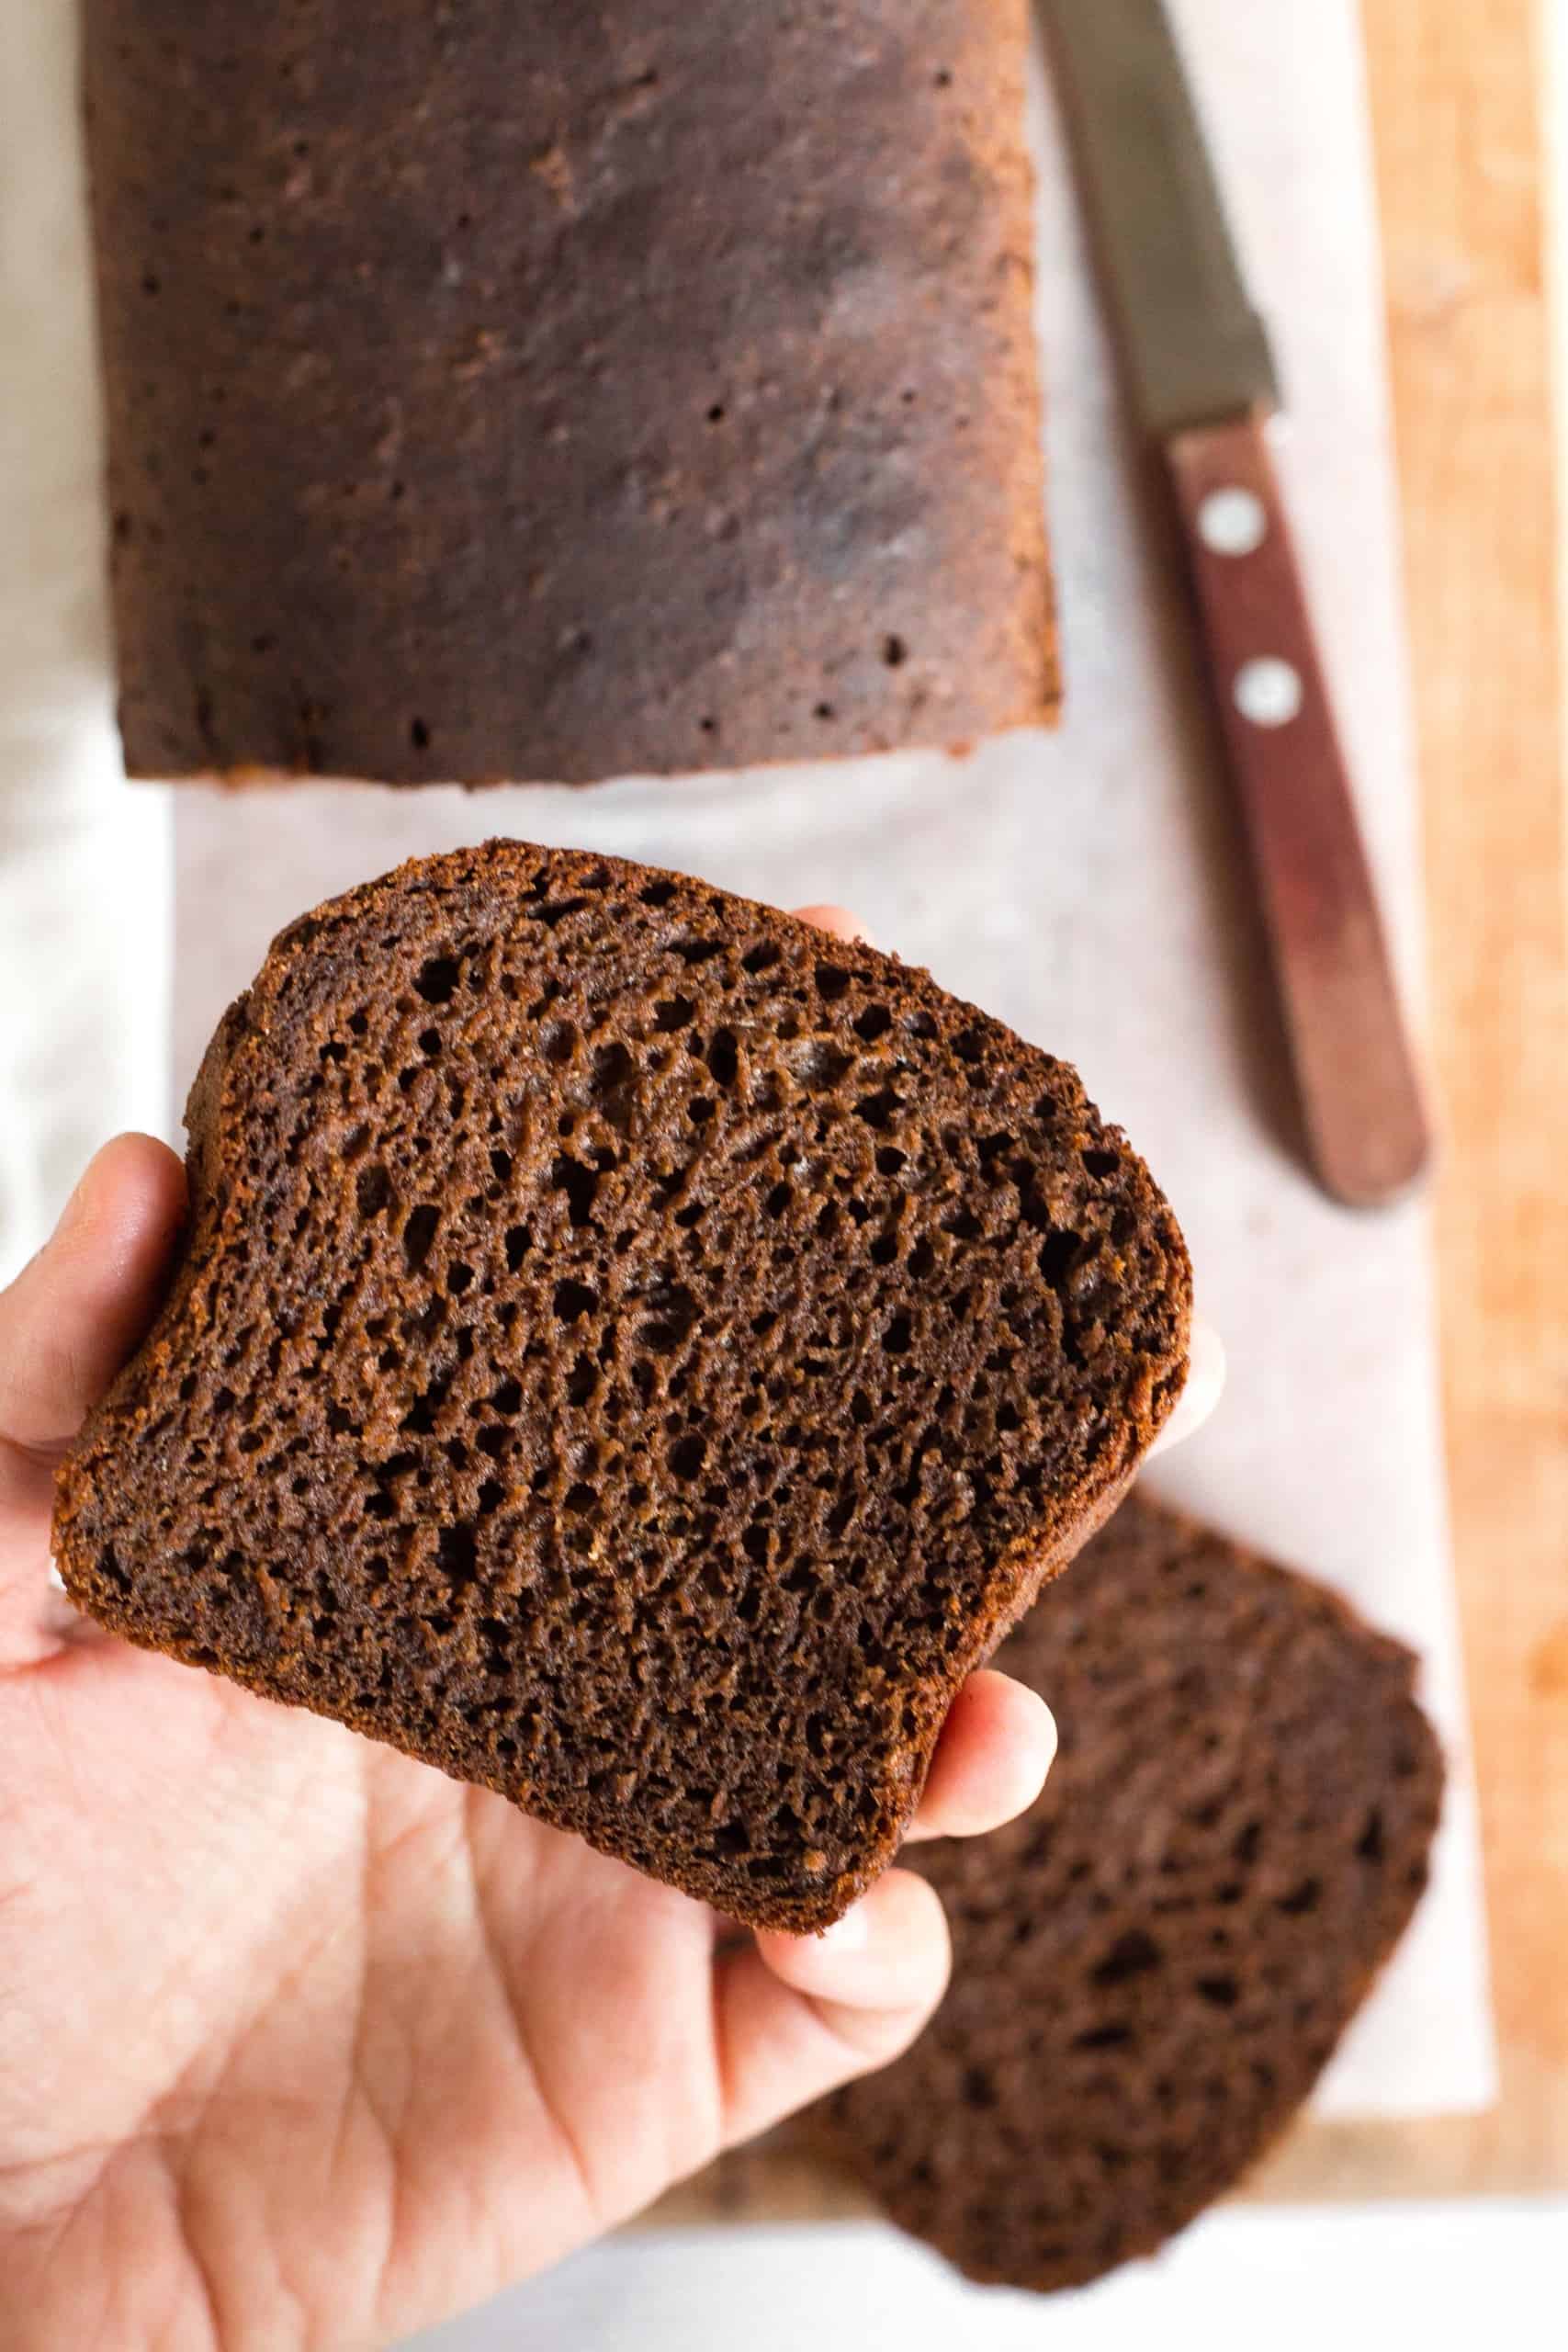 Holding up a slice of gluten-free pumpernickel bread to show the texture.